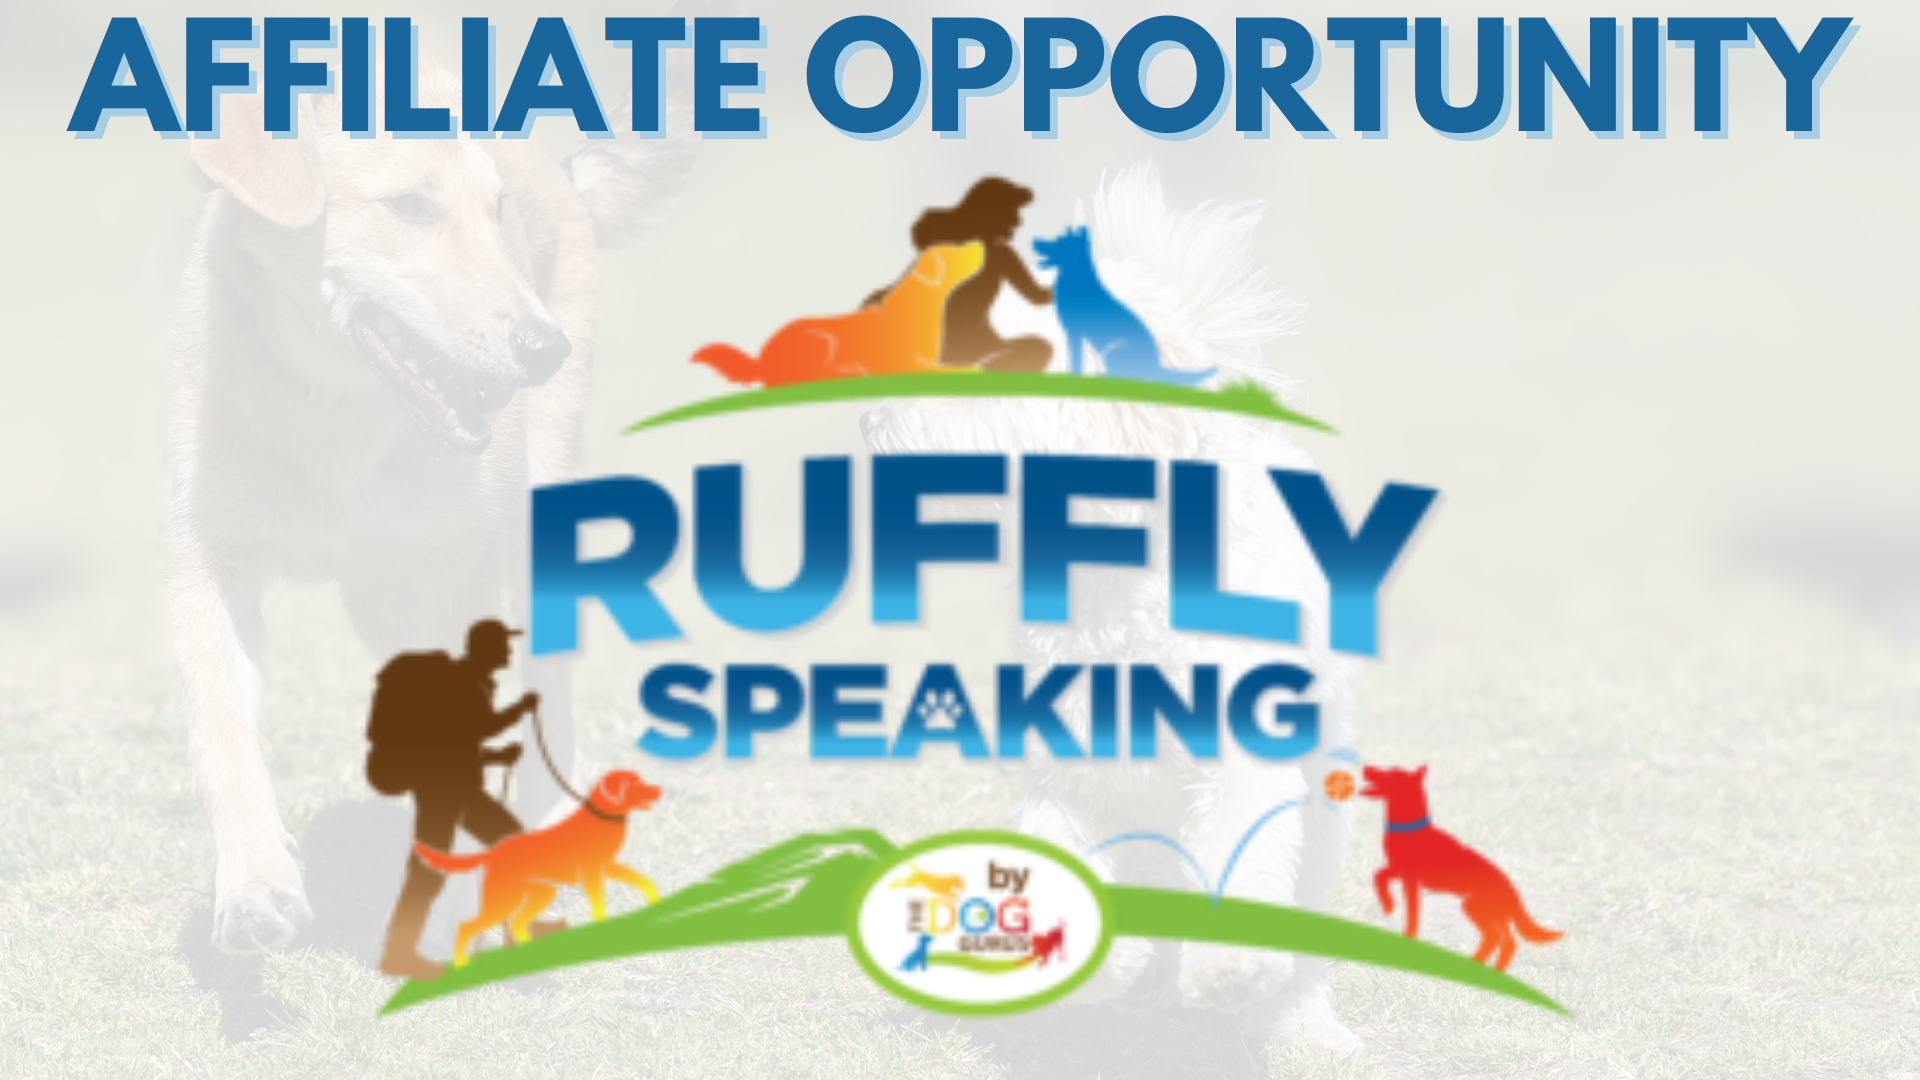 Ruffly Speaking Affiliate Program for Dog Owners and Pet Lovers